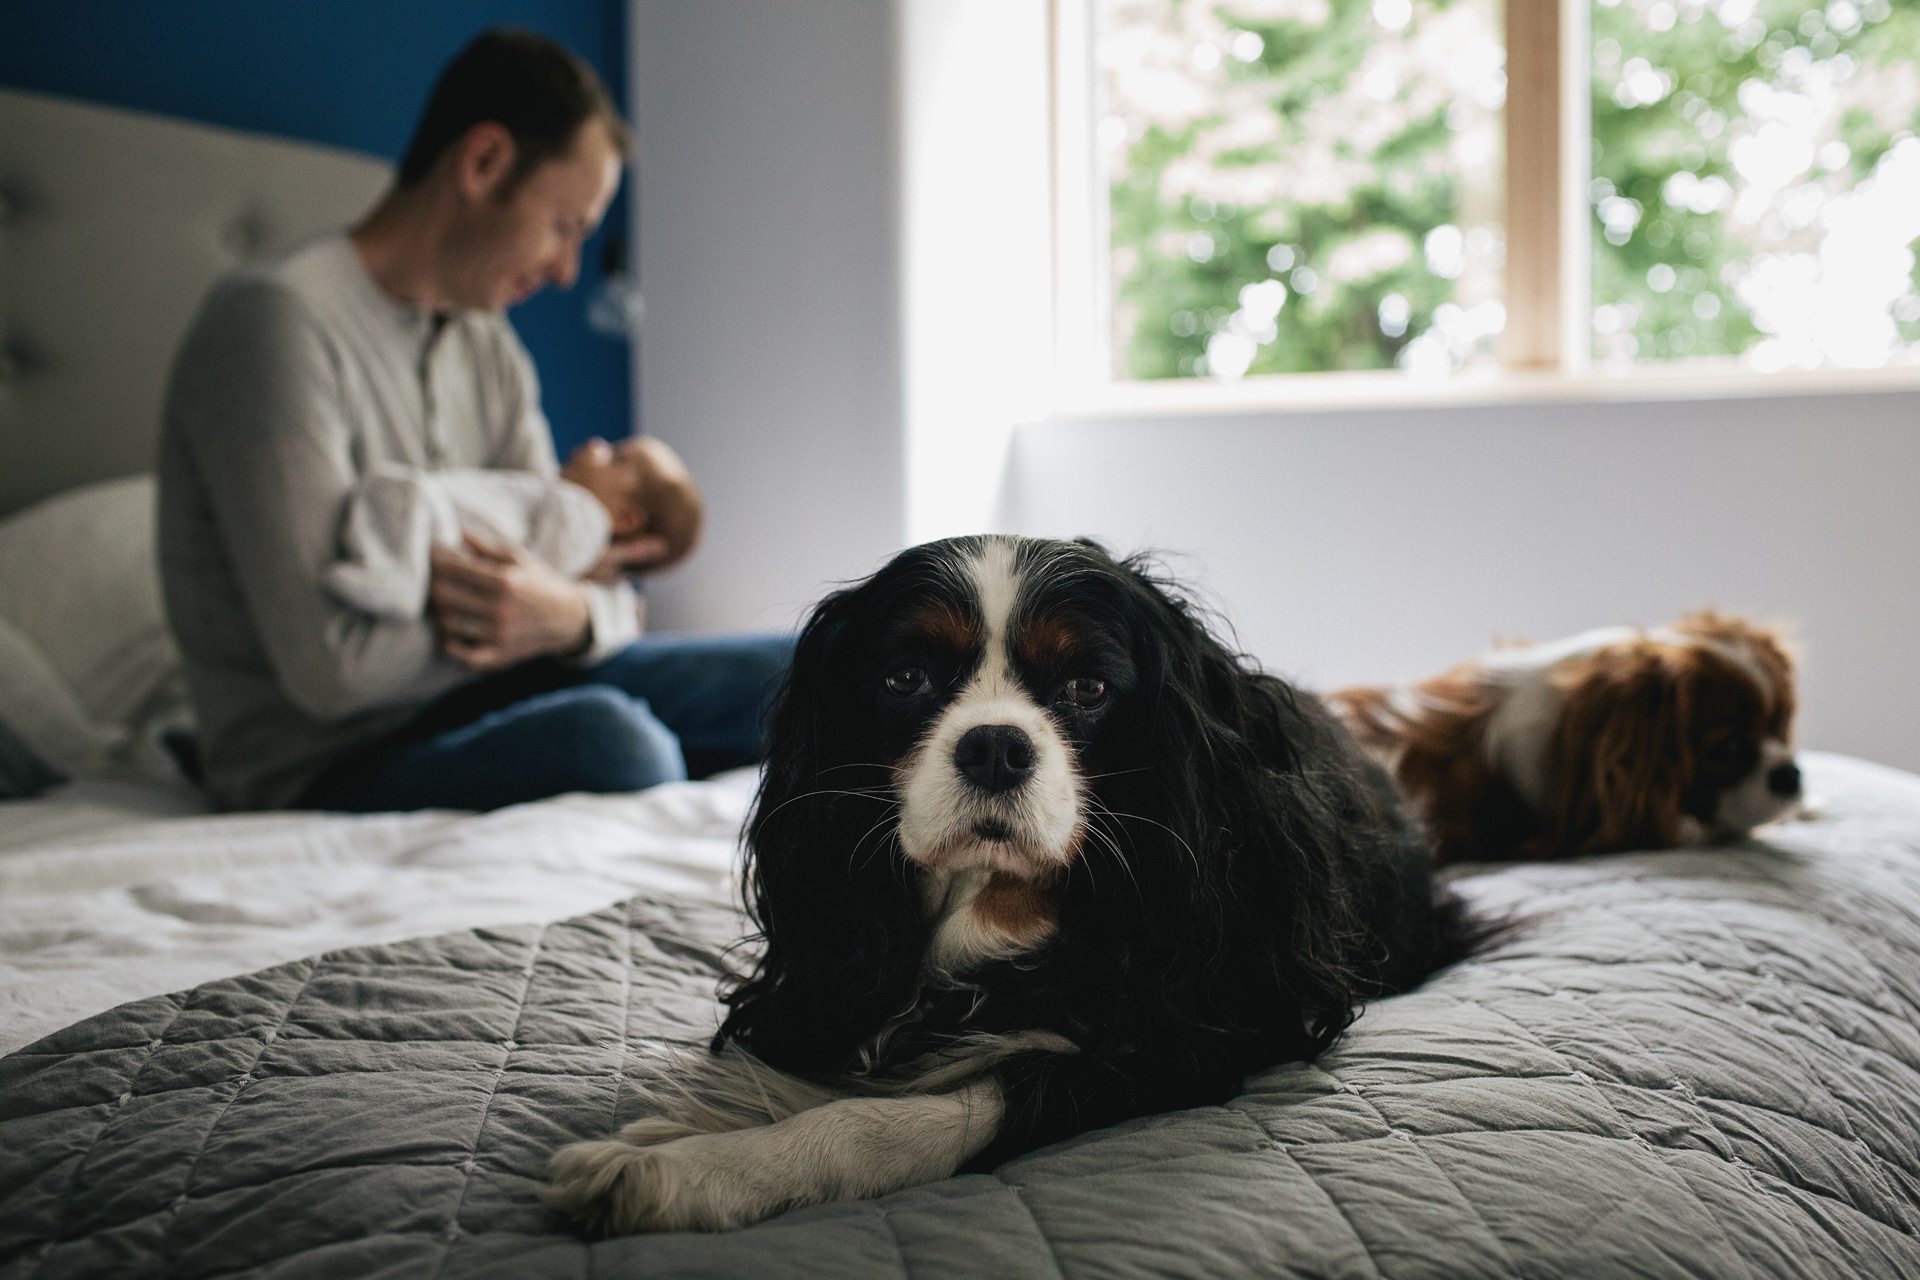 King Charles spaniels on a bed with a father and new baby